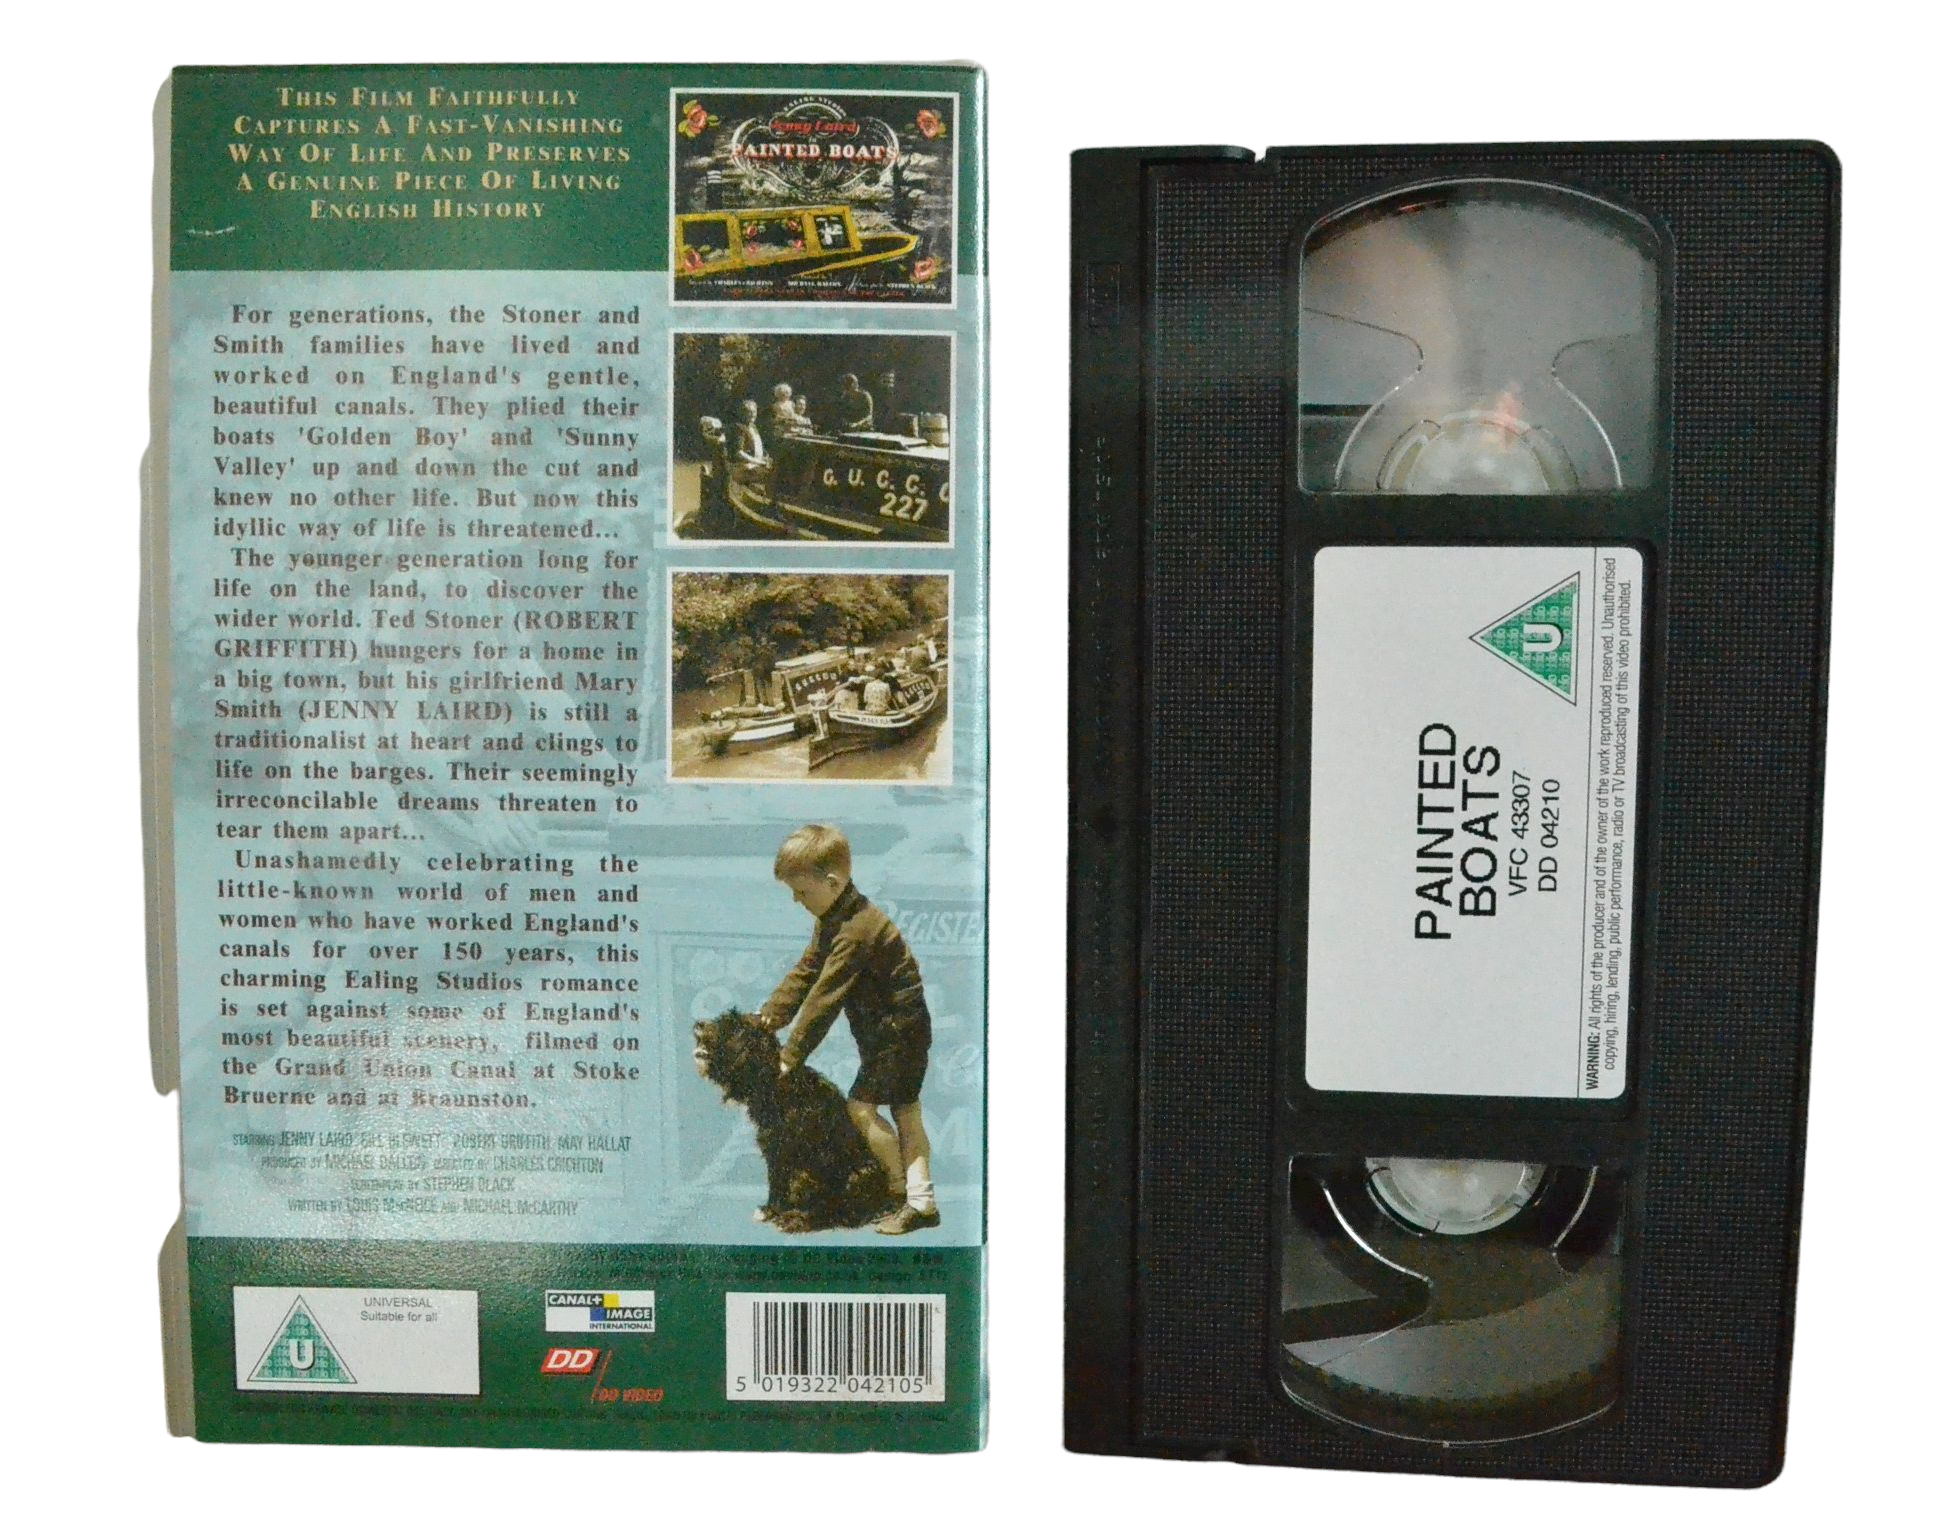 Painted Boats (Romance On The Canals) - Jenny Laird - DD Video - Vintage - Pal VHS-